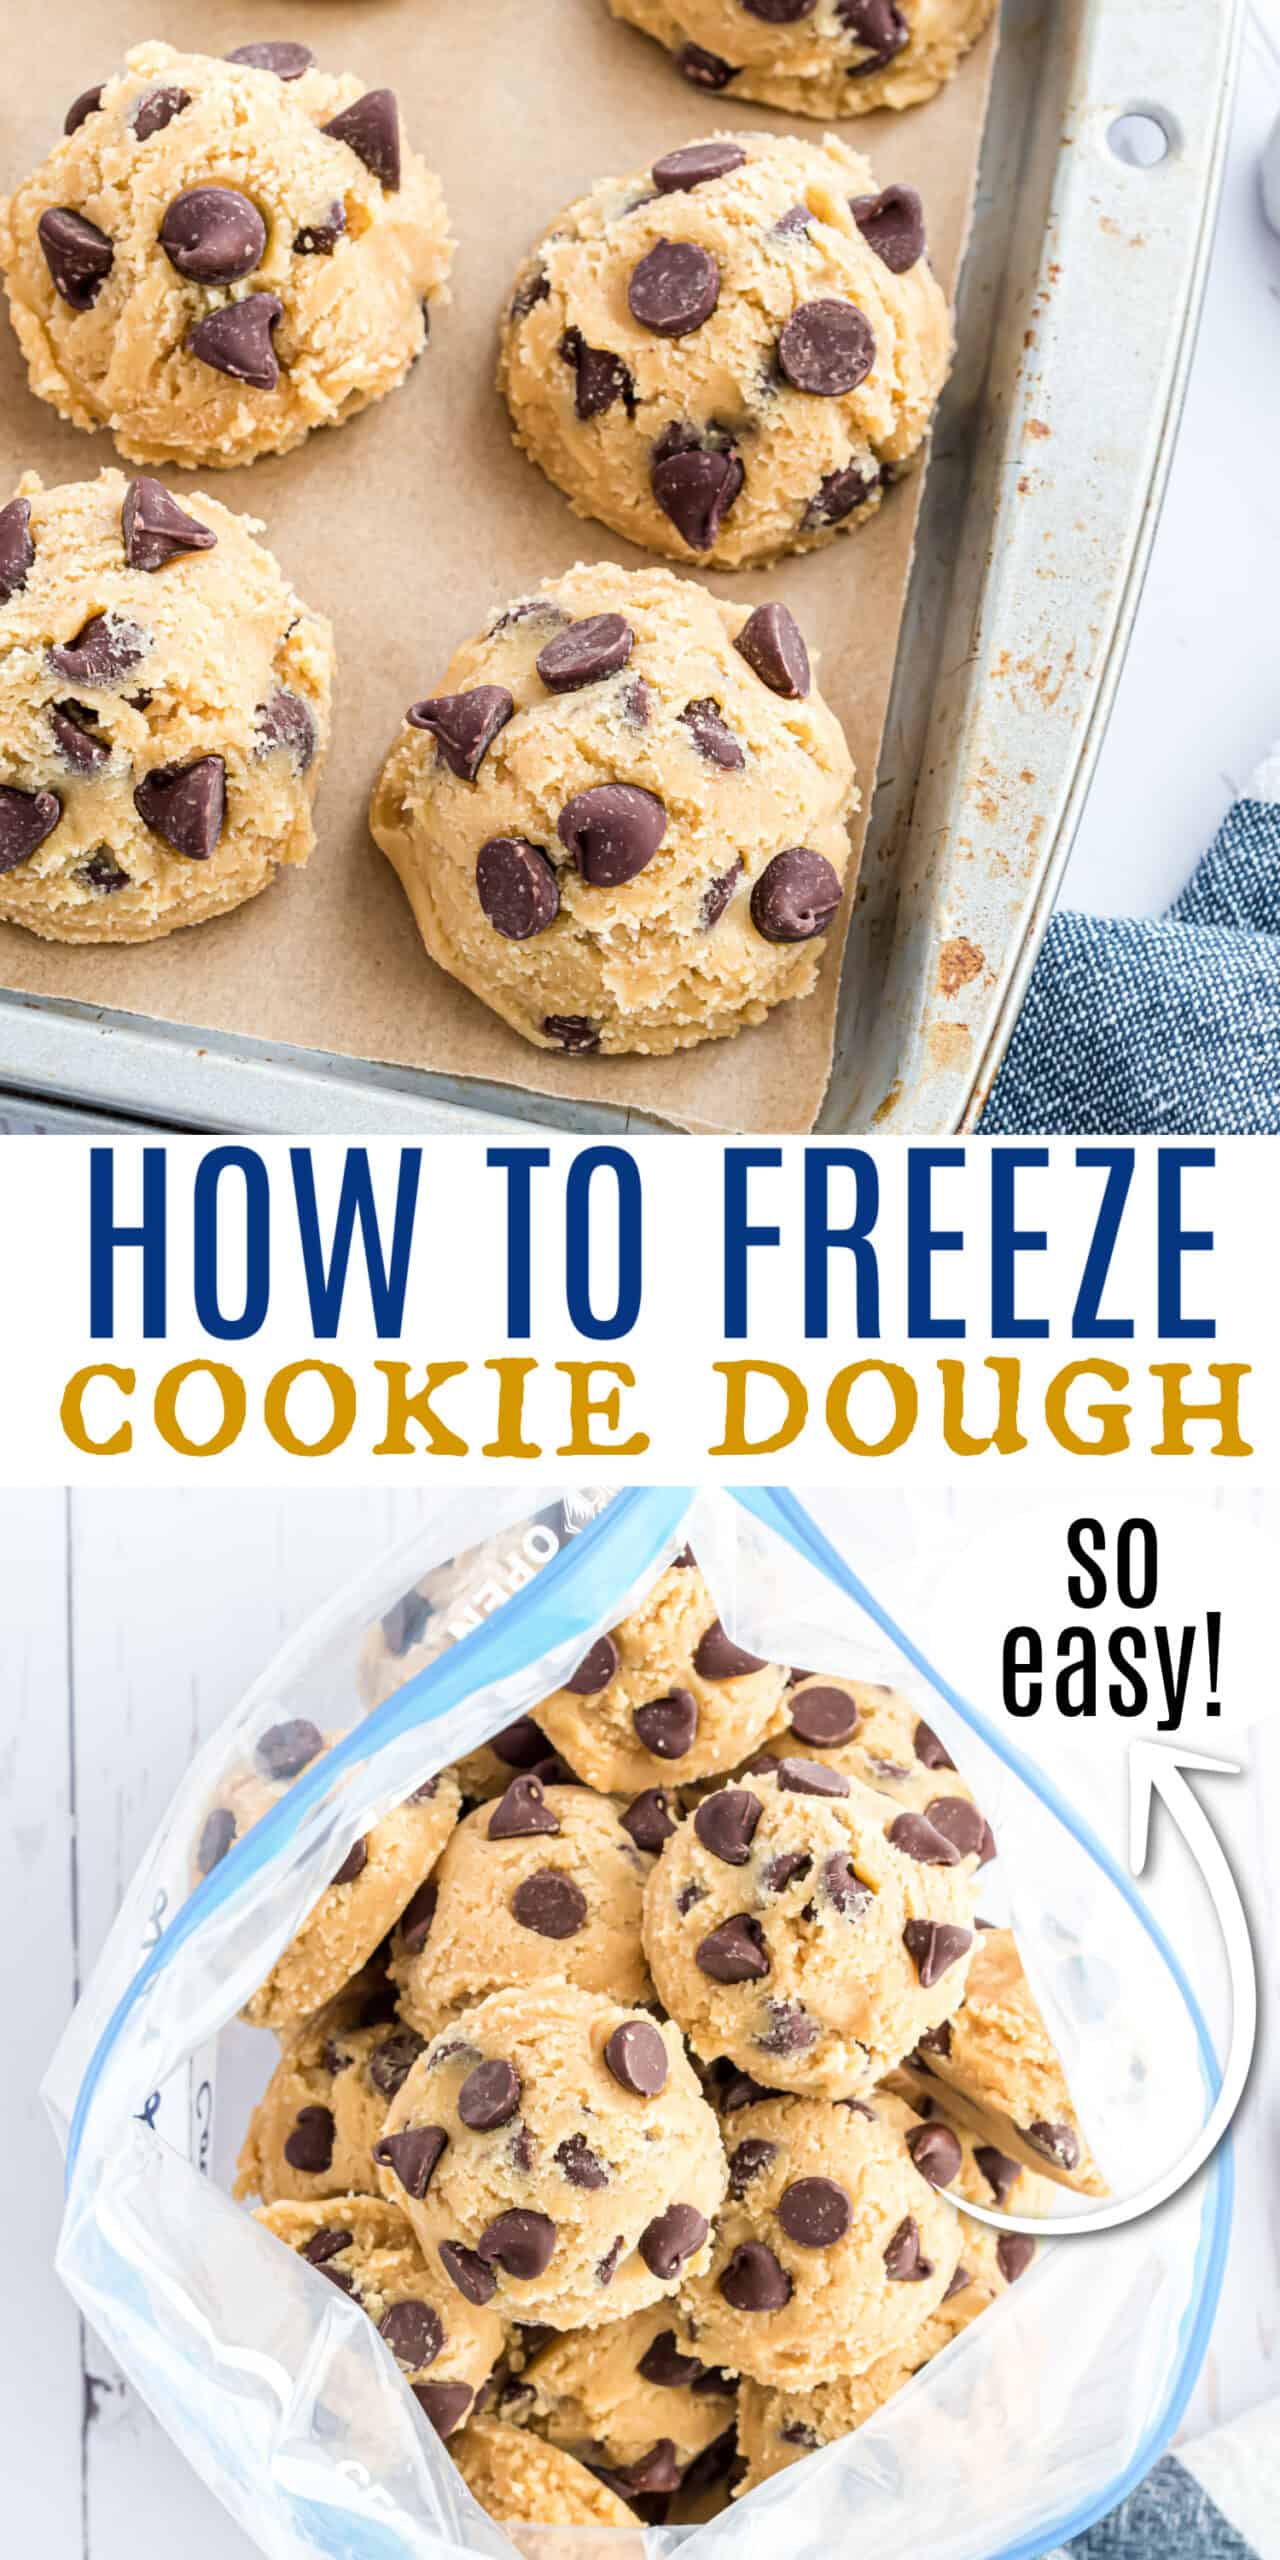 How to Freeze Cookie Dough – Best Way to Freeze Homemade Cookies